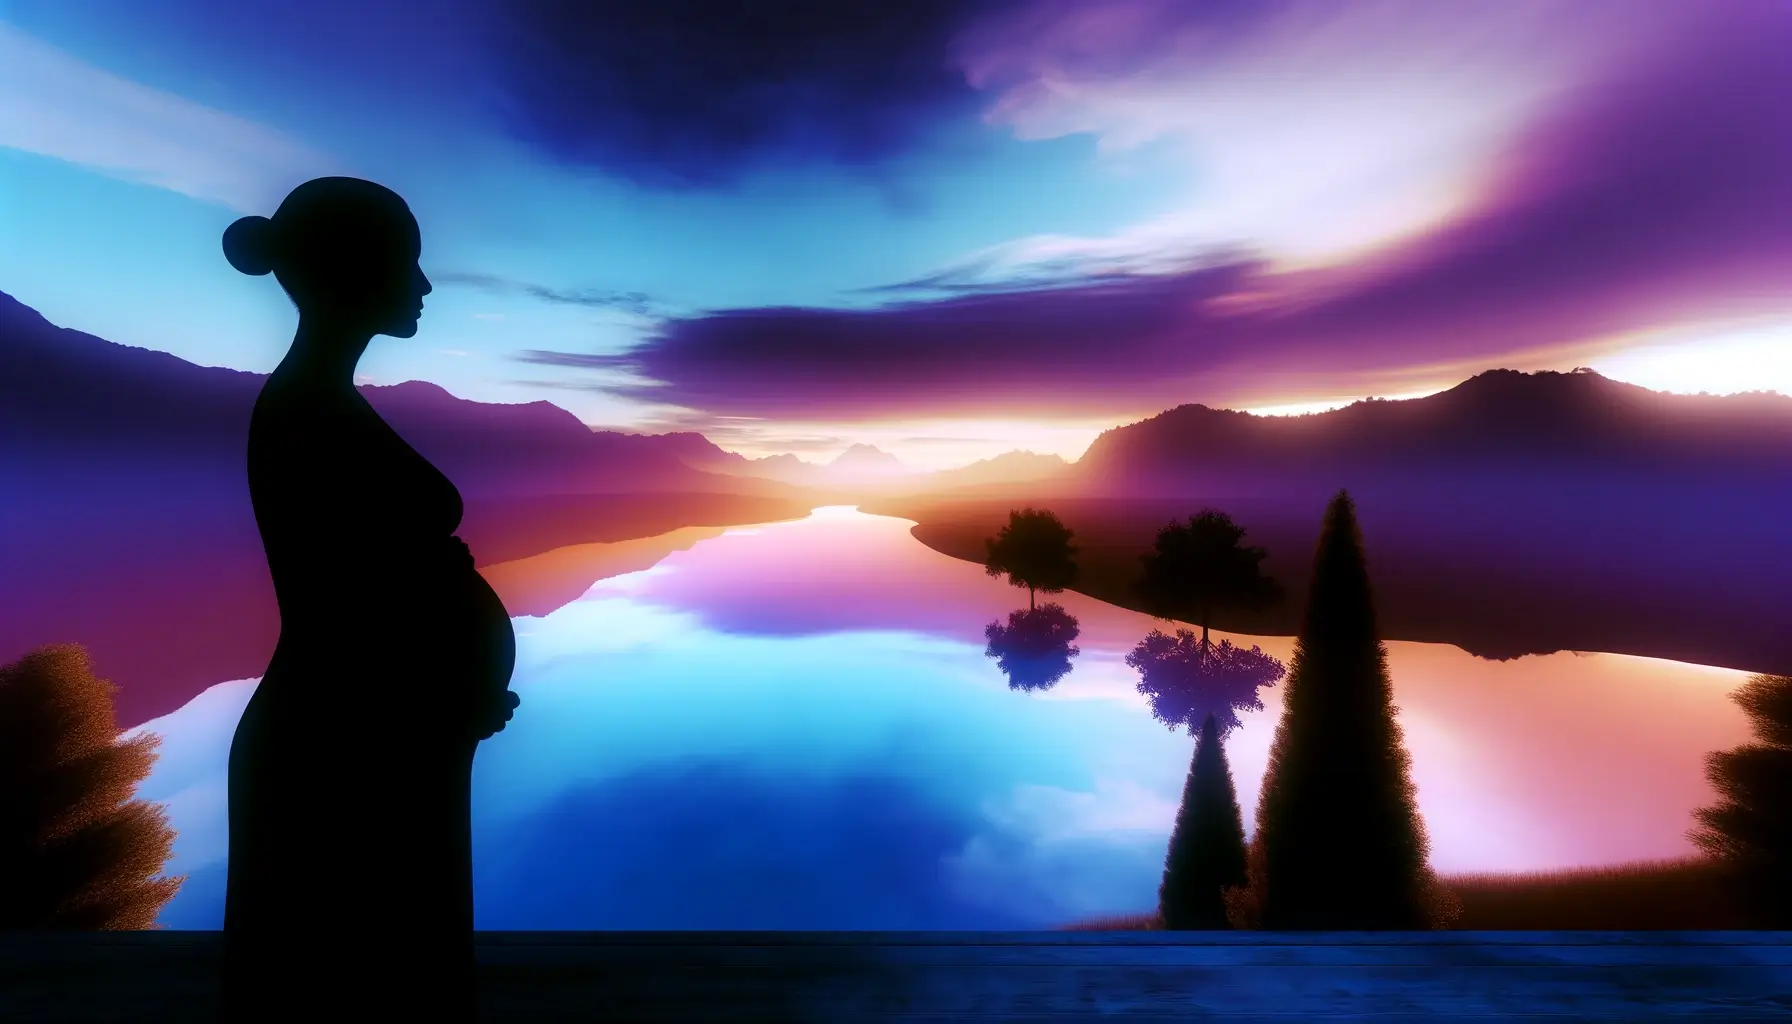 Silhouette of a pregnant woman contemplating by a tranquil lake at sunset.